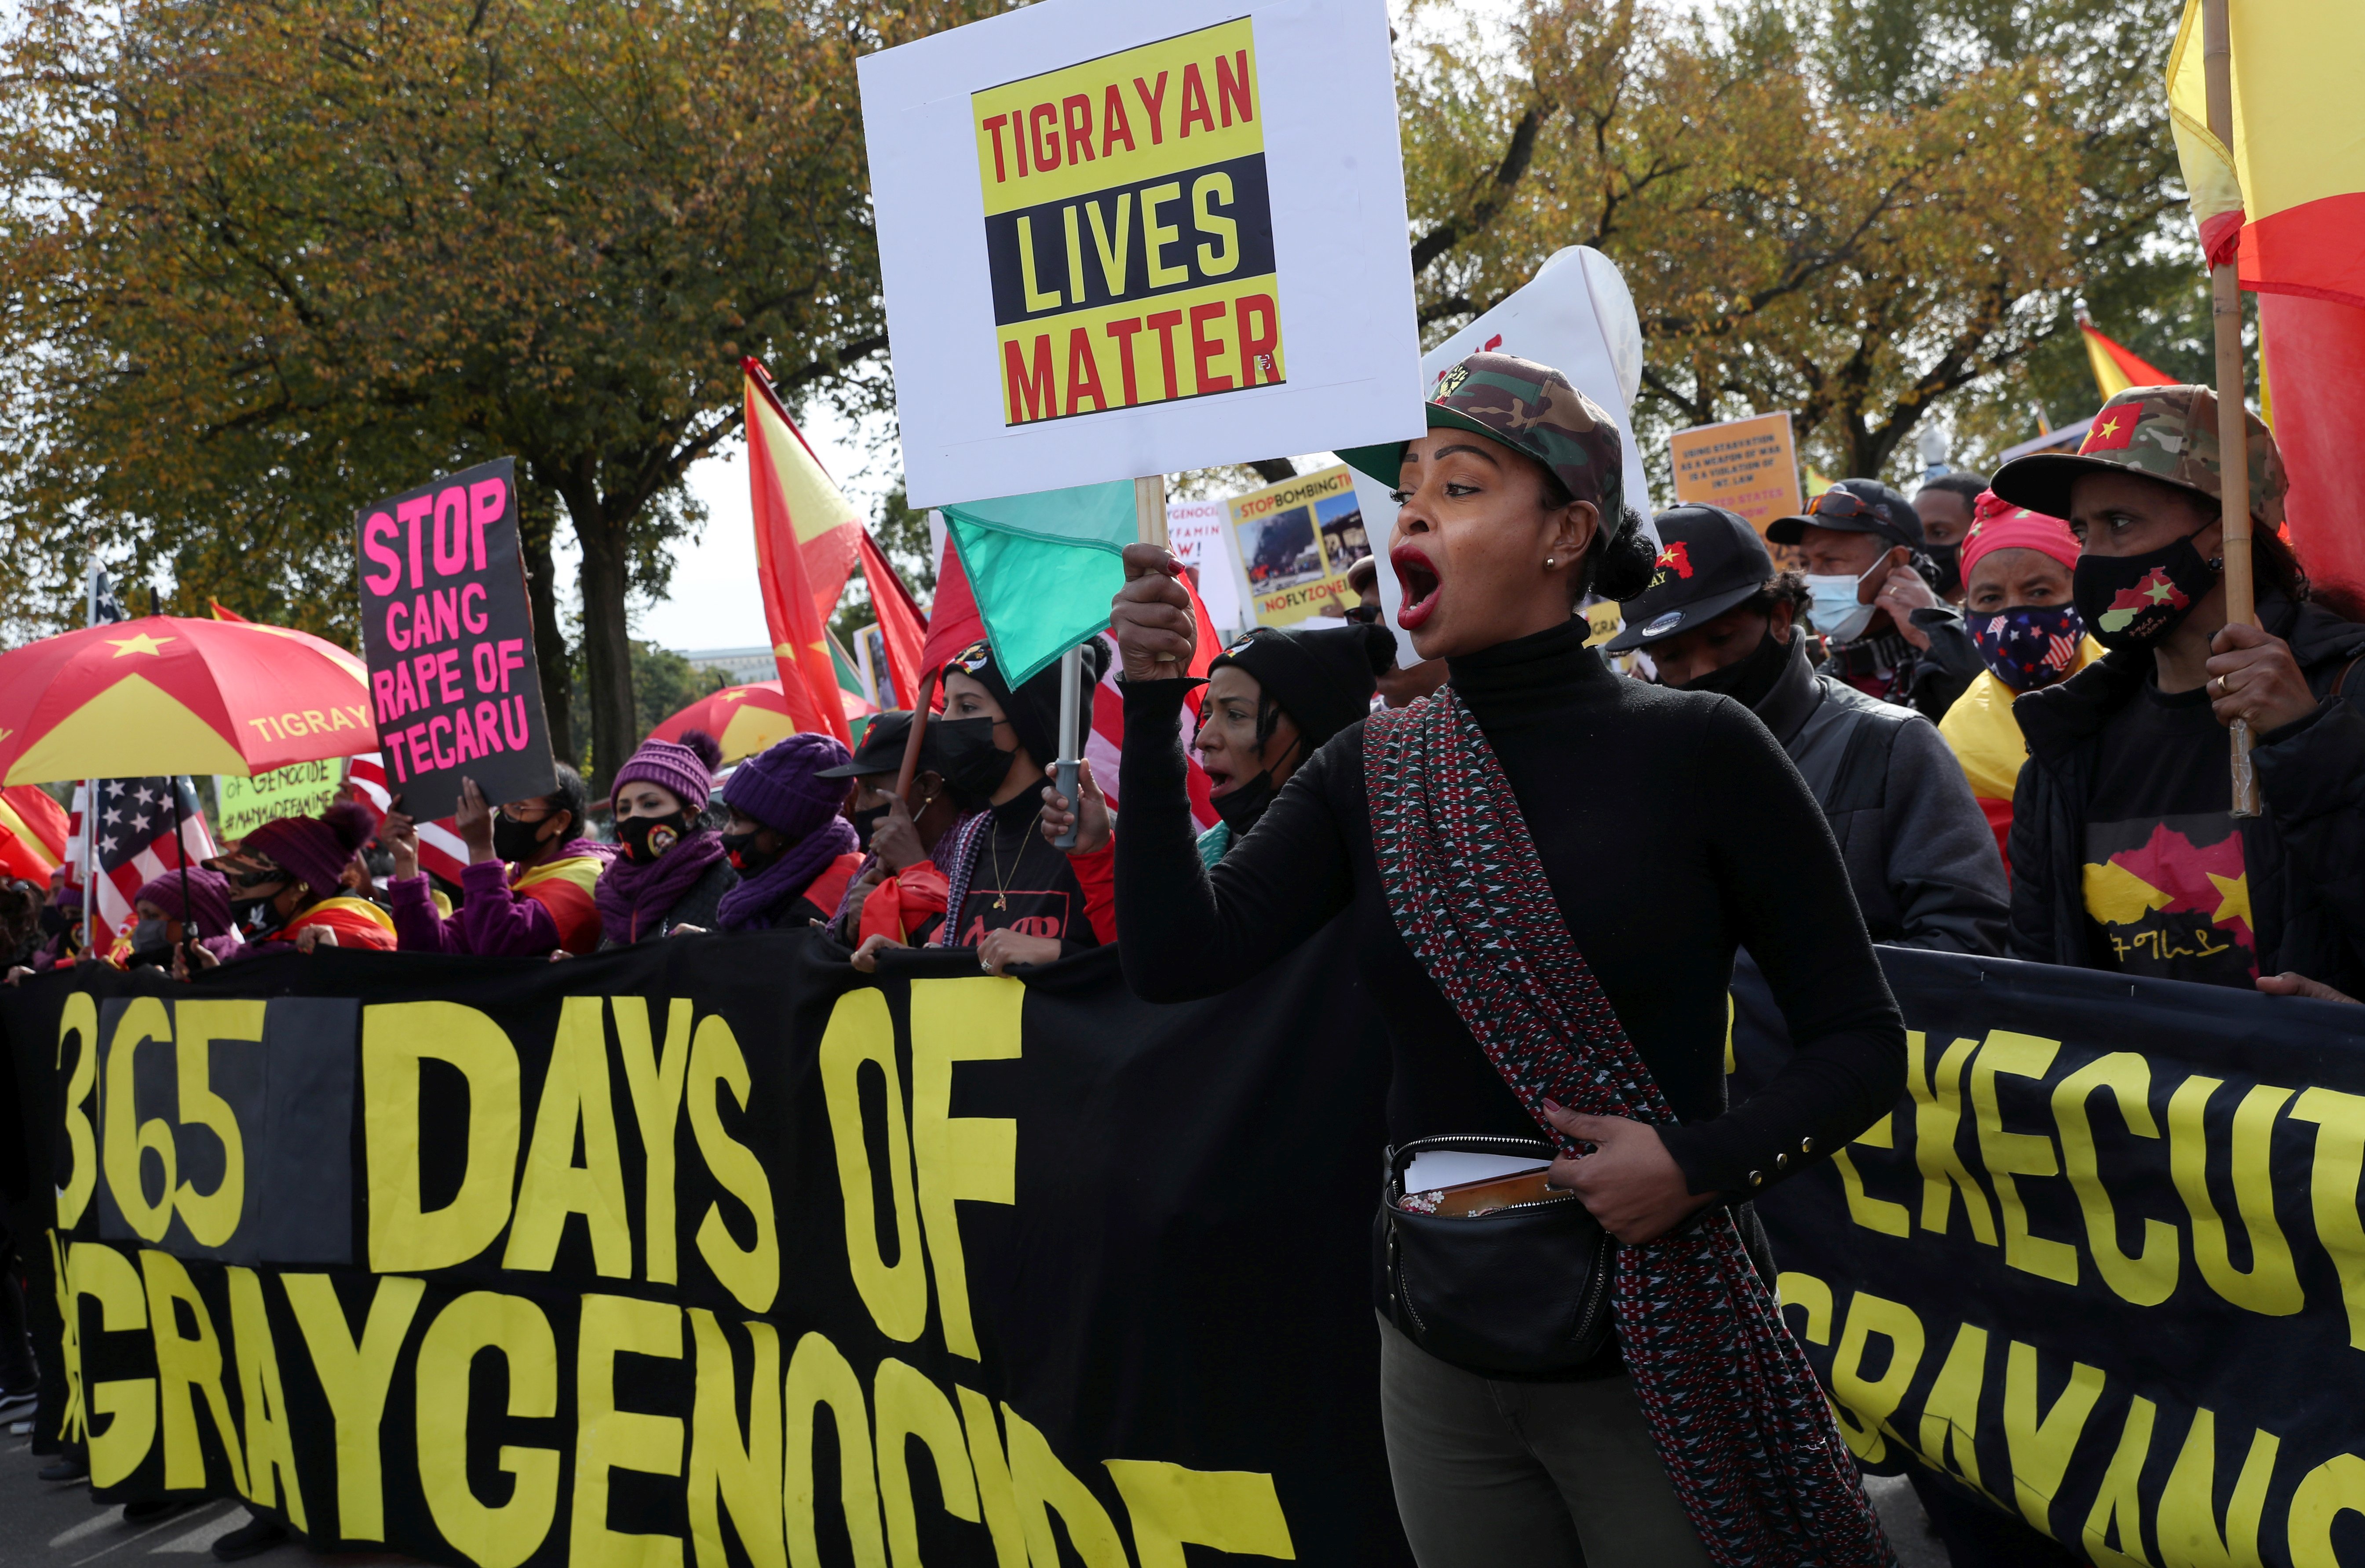 A woman holding a sign shouts during a protest in Washington Nov. 4, 2021, in response to the civilian casualties and abuses caused as a result of a yearlong war in Ethiopia's Tigray region.  (CNS photo/Leah Millis, Reuters)